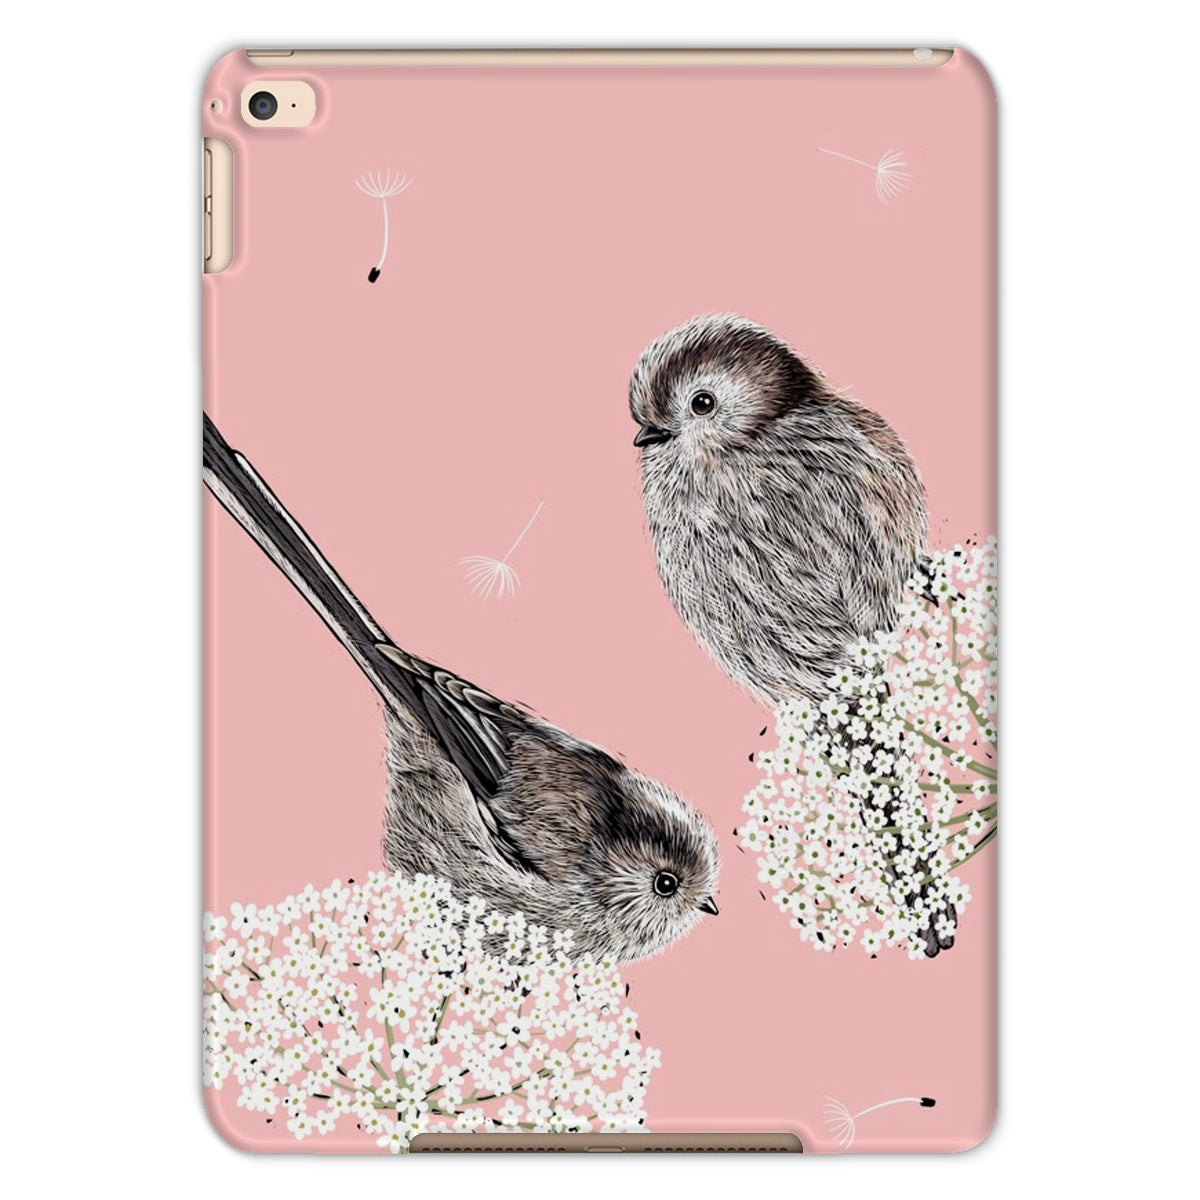 Long Tailed Tits Tablet Case - Salmon